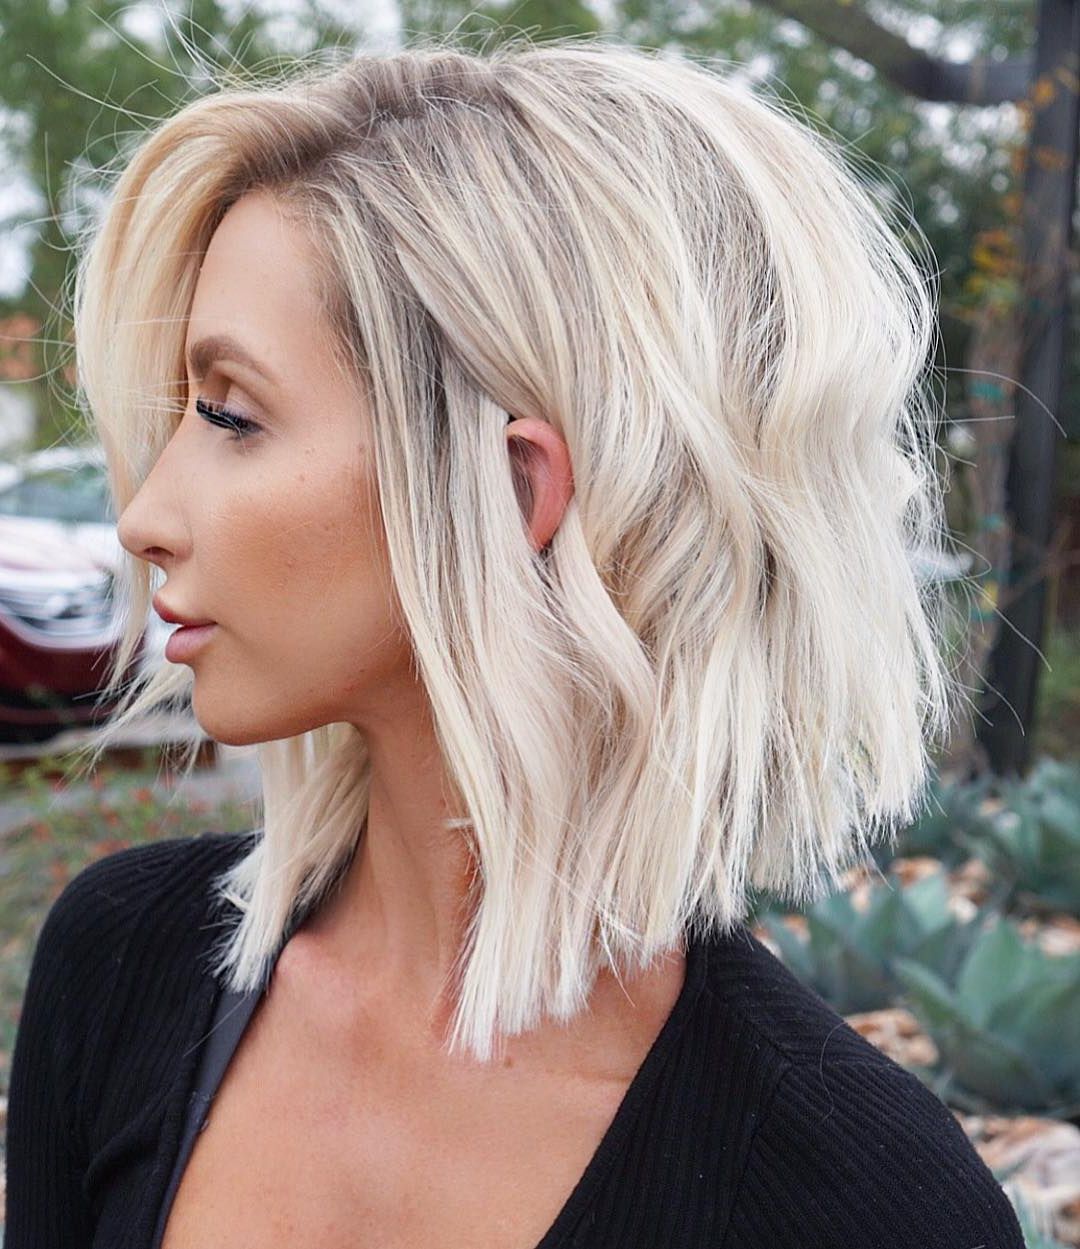 Find Your Best Bob Haircut For 2019 In Side Parted Bob Hairstyles With Textured Ends (View 6 of 20)